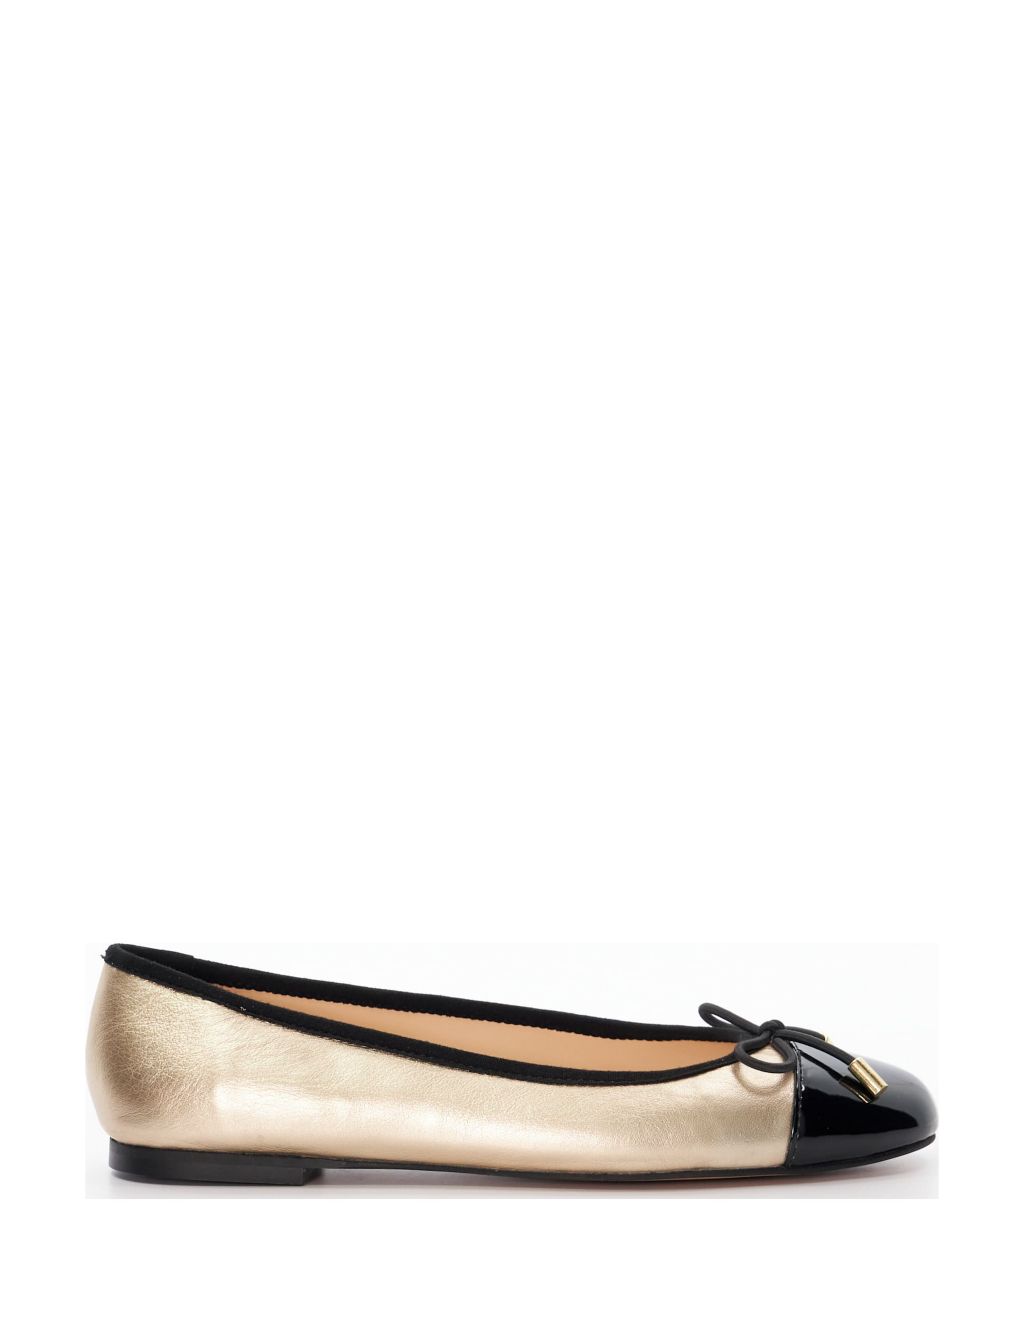 Leather Bow Slip On Flat Ballet Pumps